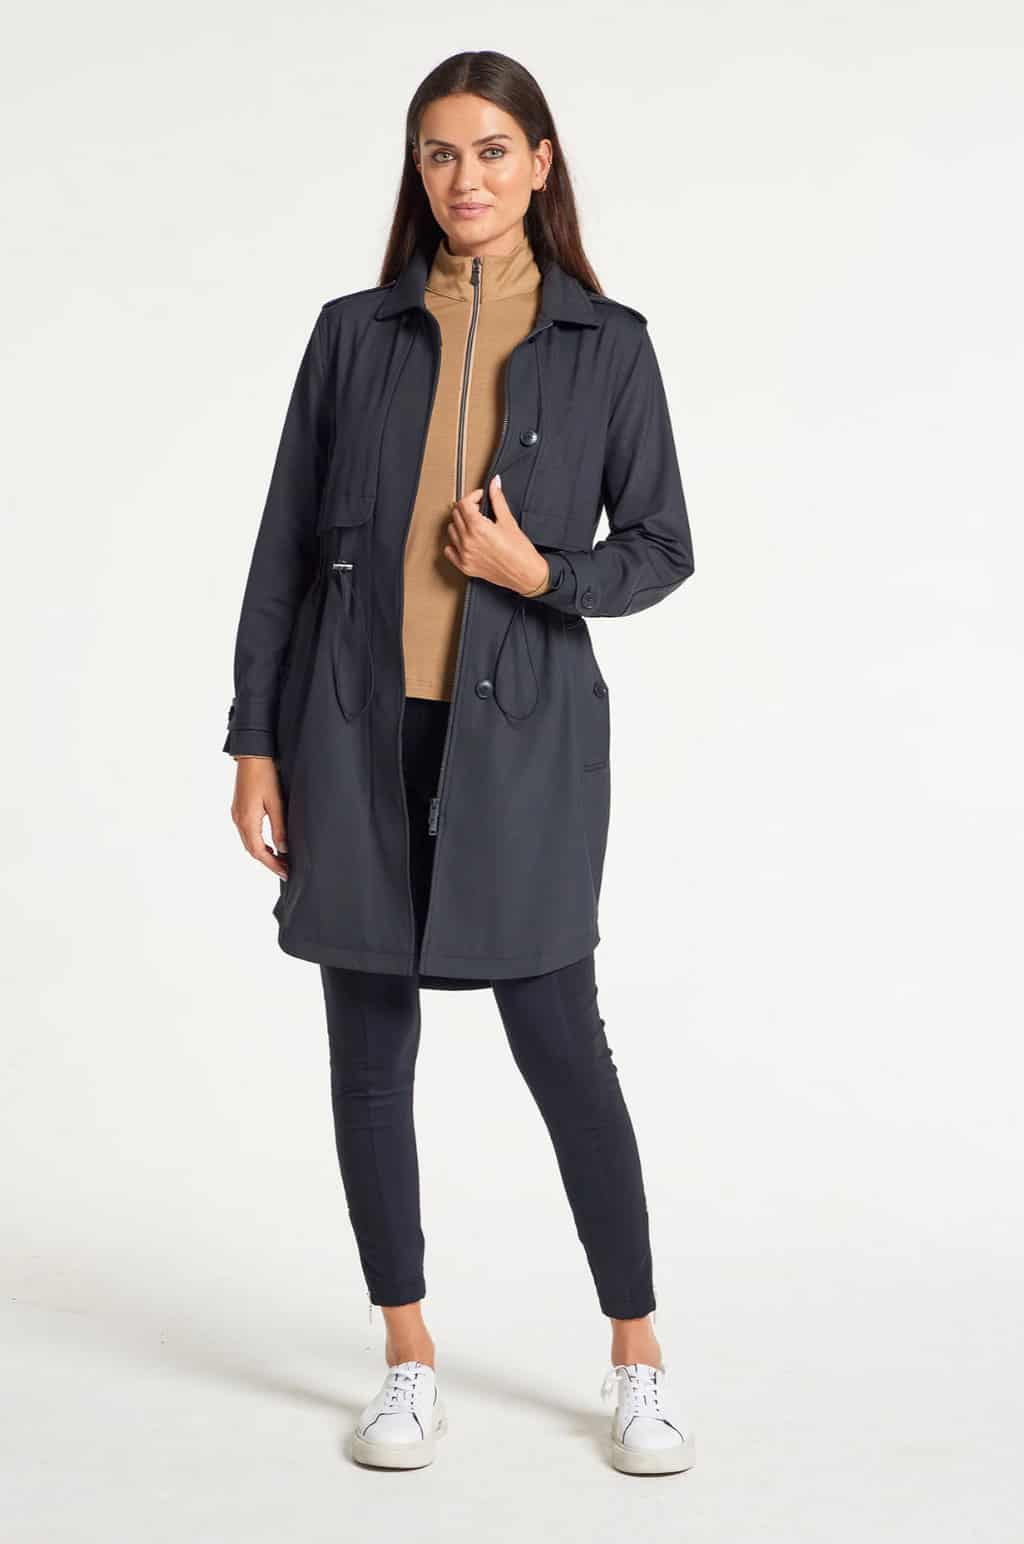 Attracive woman with dark hair modelling a dark coloured travel trench coat.